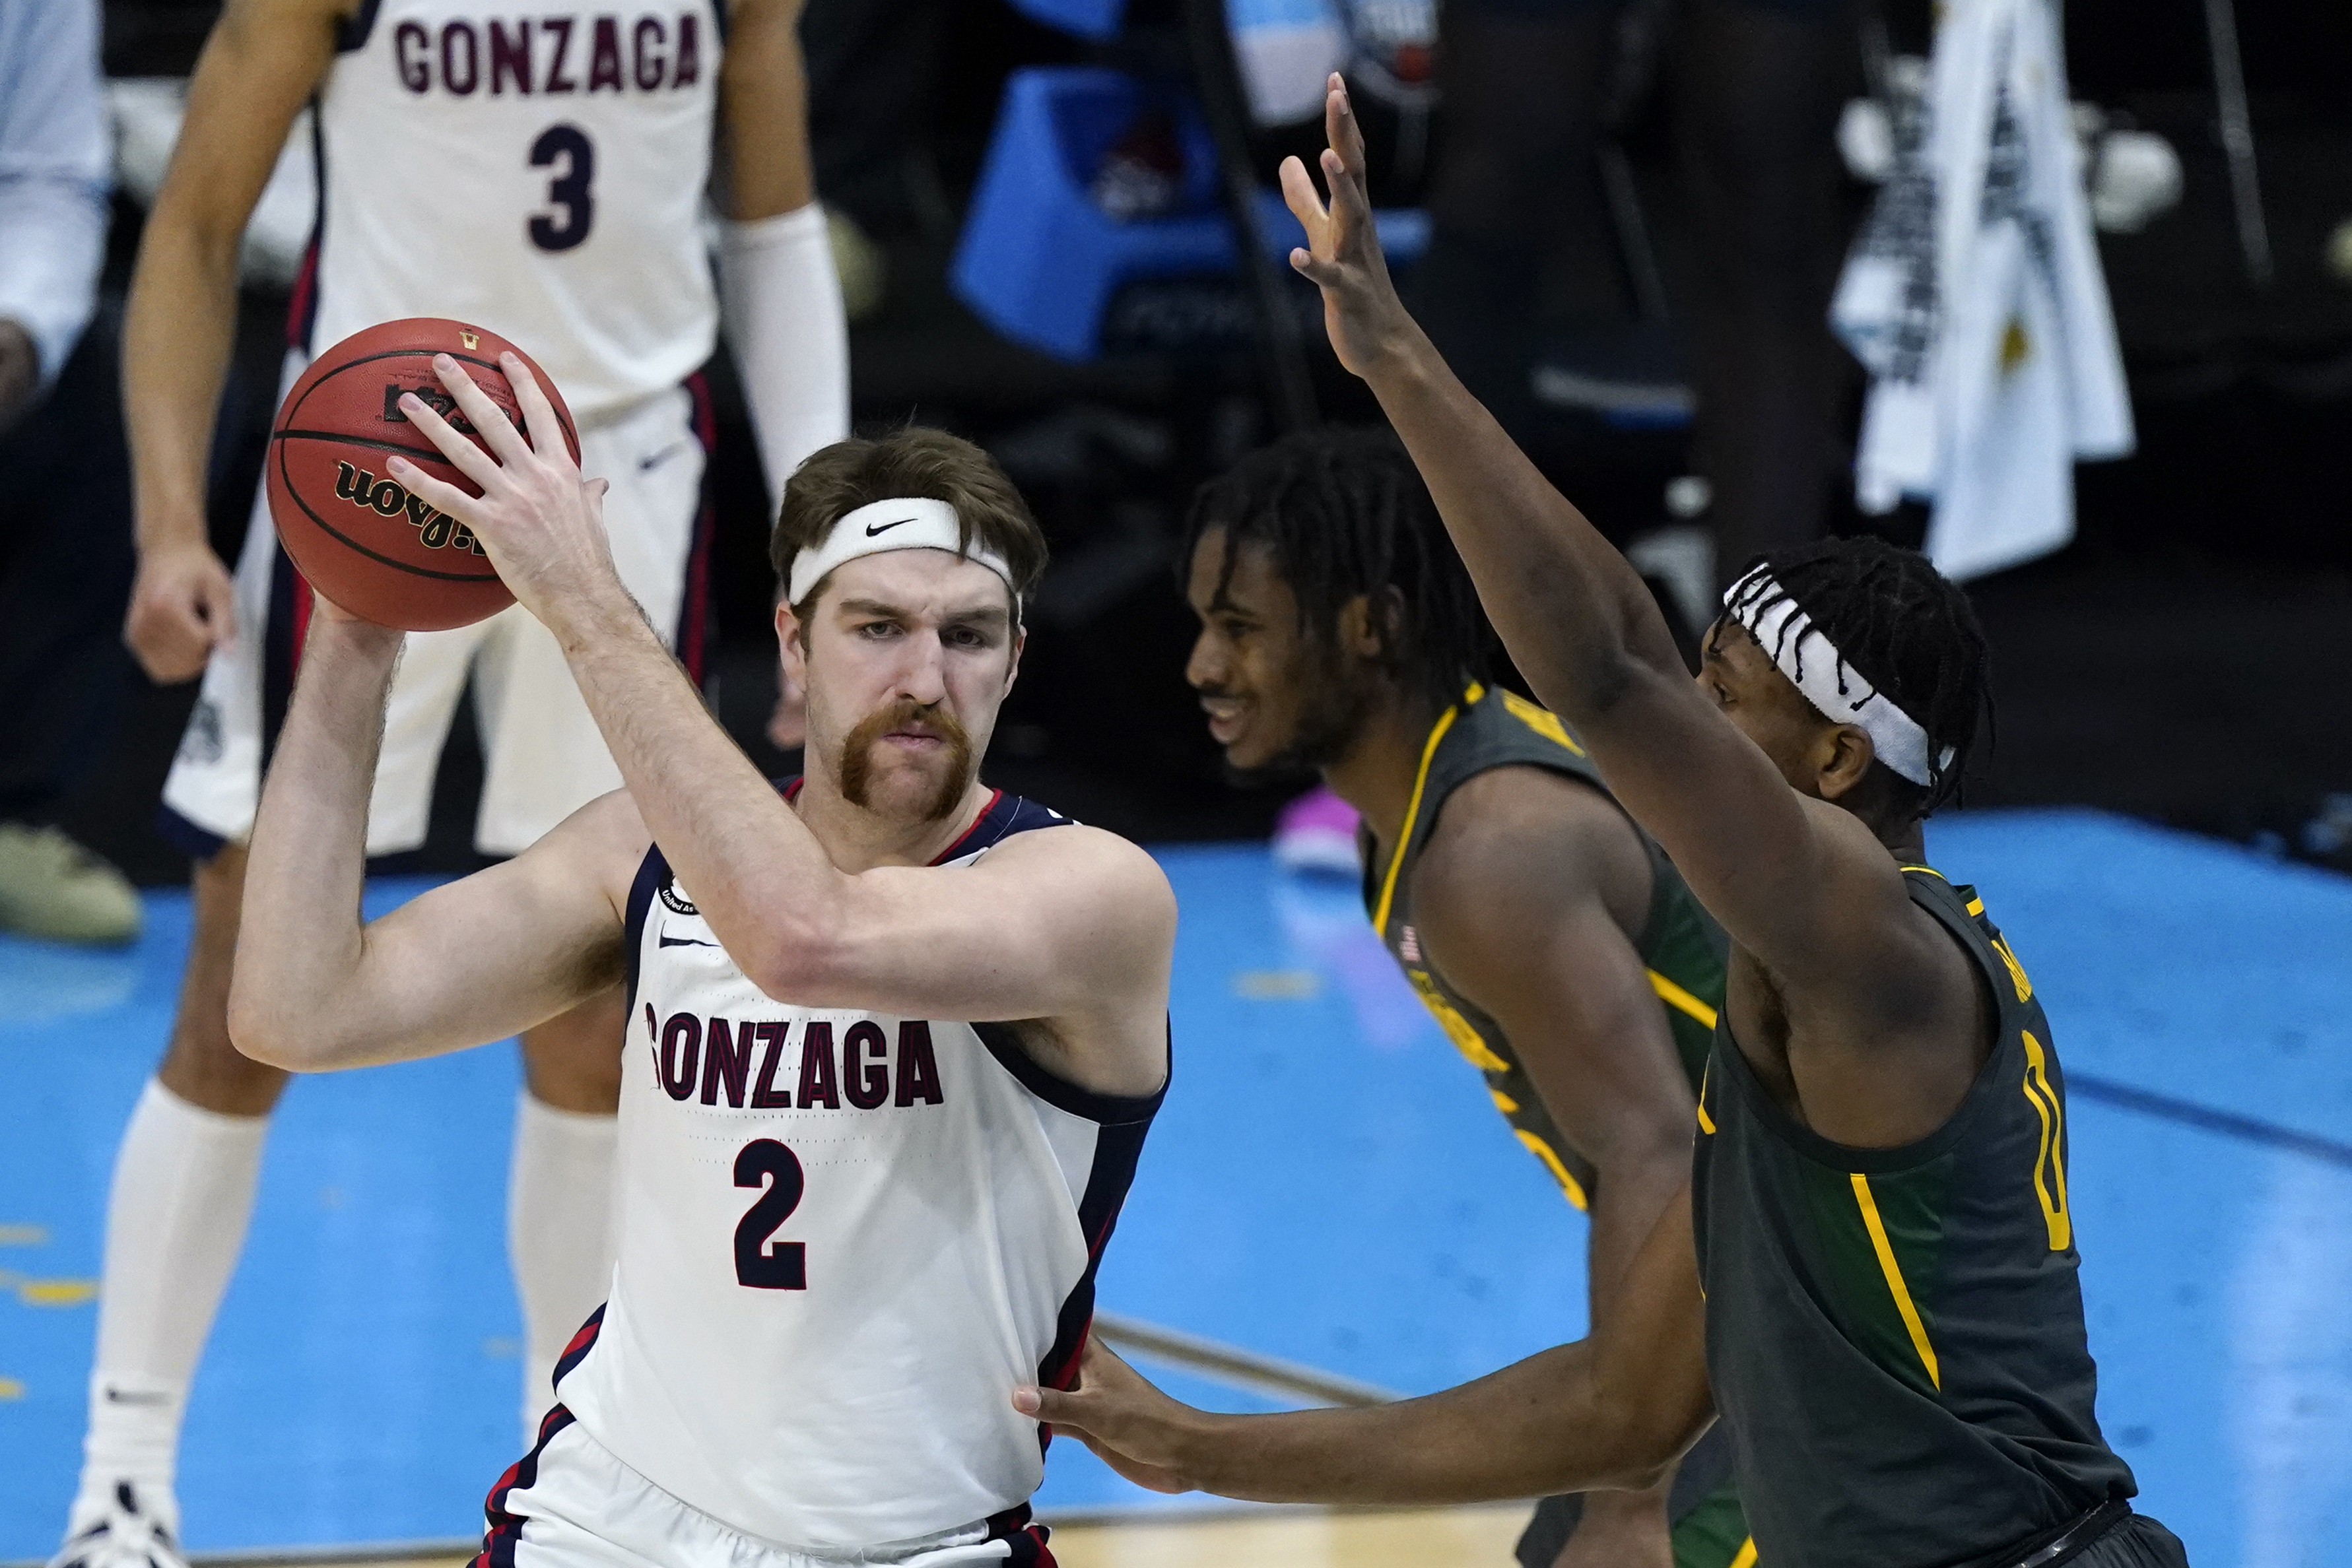 Gonzaga forward Drew Timme helped lead the Bulldogs to the national championship game this past season.